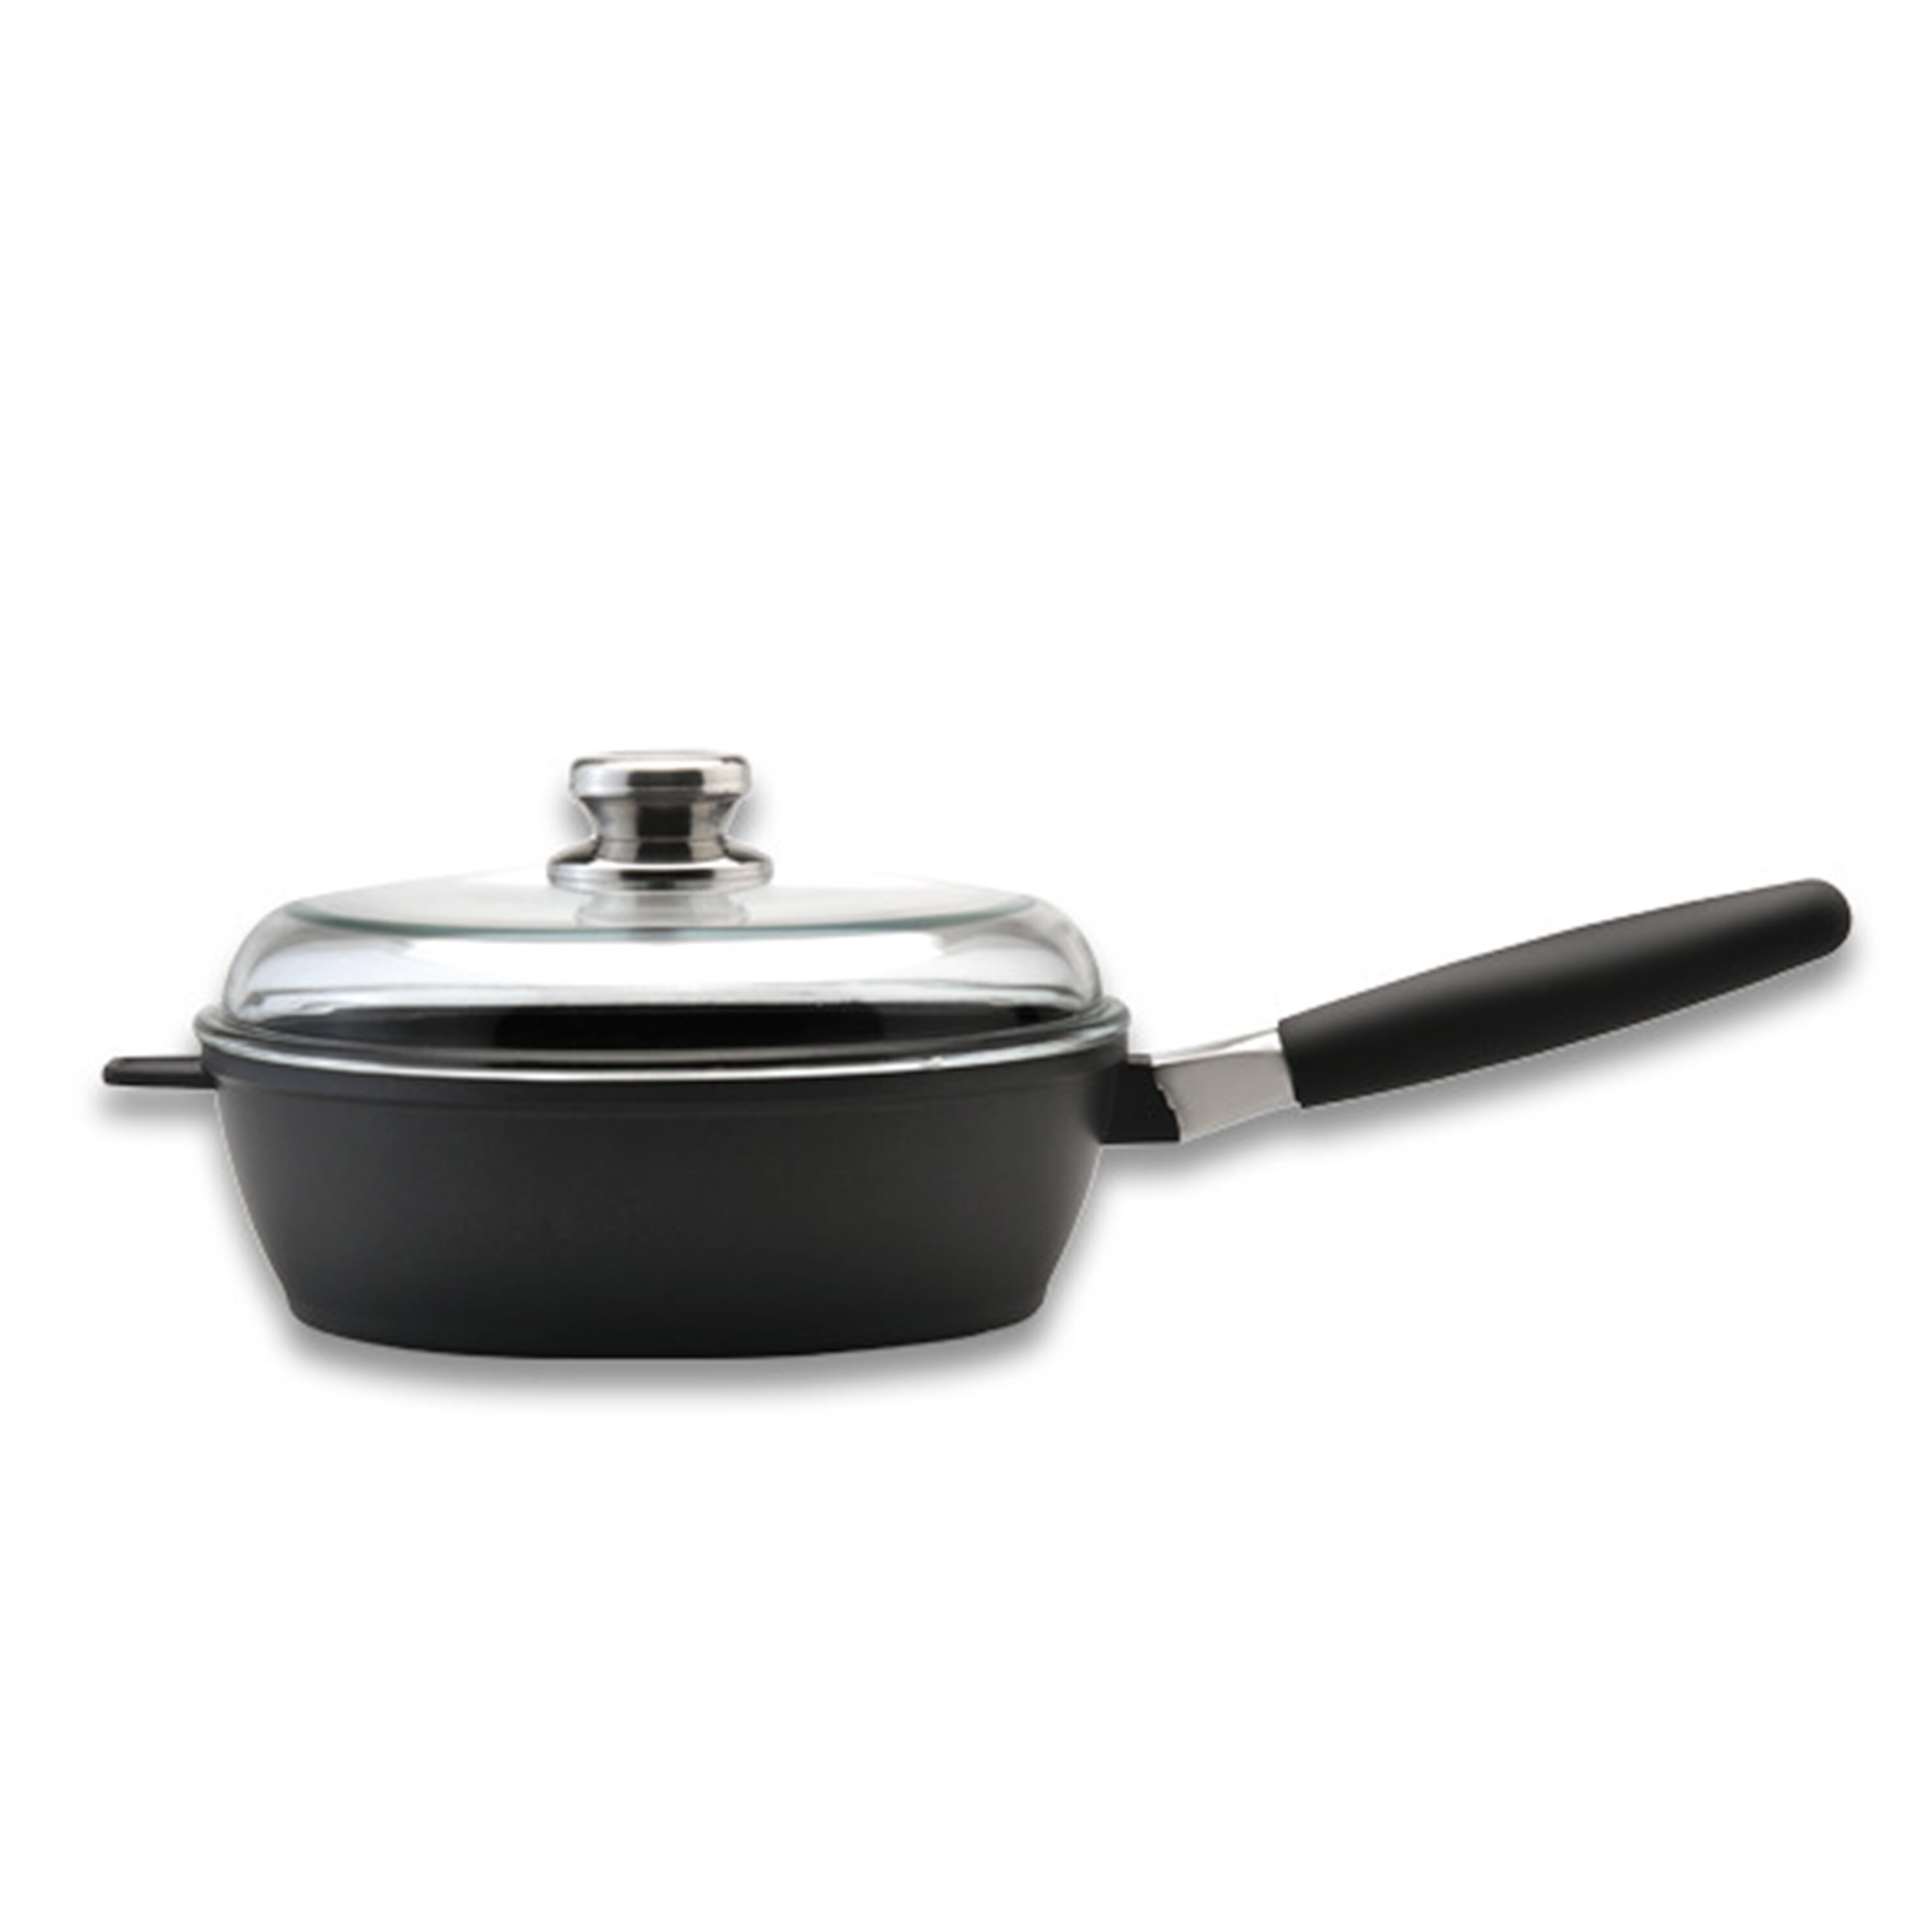 All in One Plus Pan, 5 Qt Ceramic Non Stick - Charcoal Gray - Tramontina US